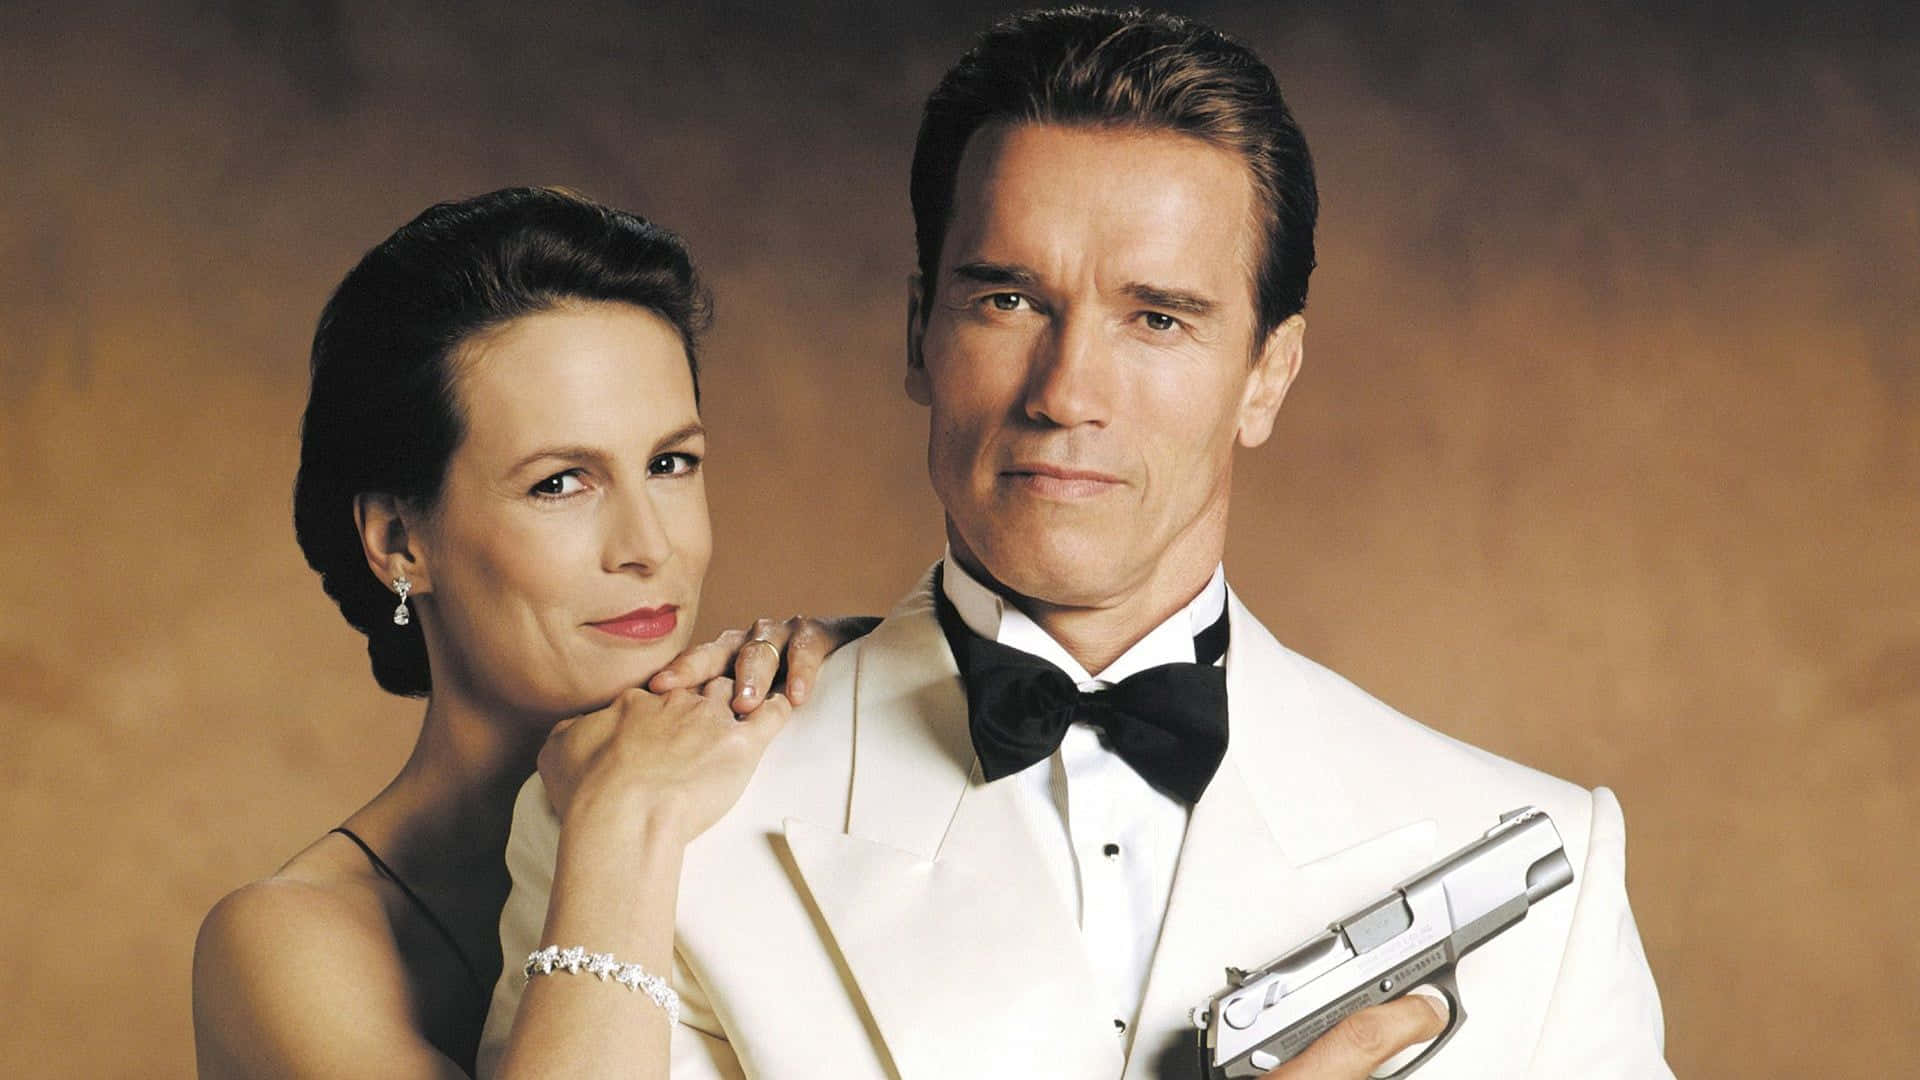 True Lies Movie: Action-Filled Adventure with Arnold Schwarzenegger and Jamie Lee Curtis Wallpaper